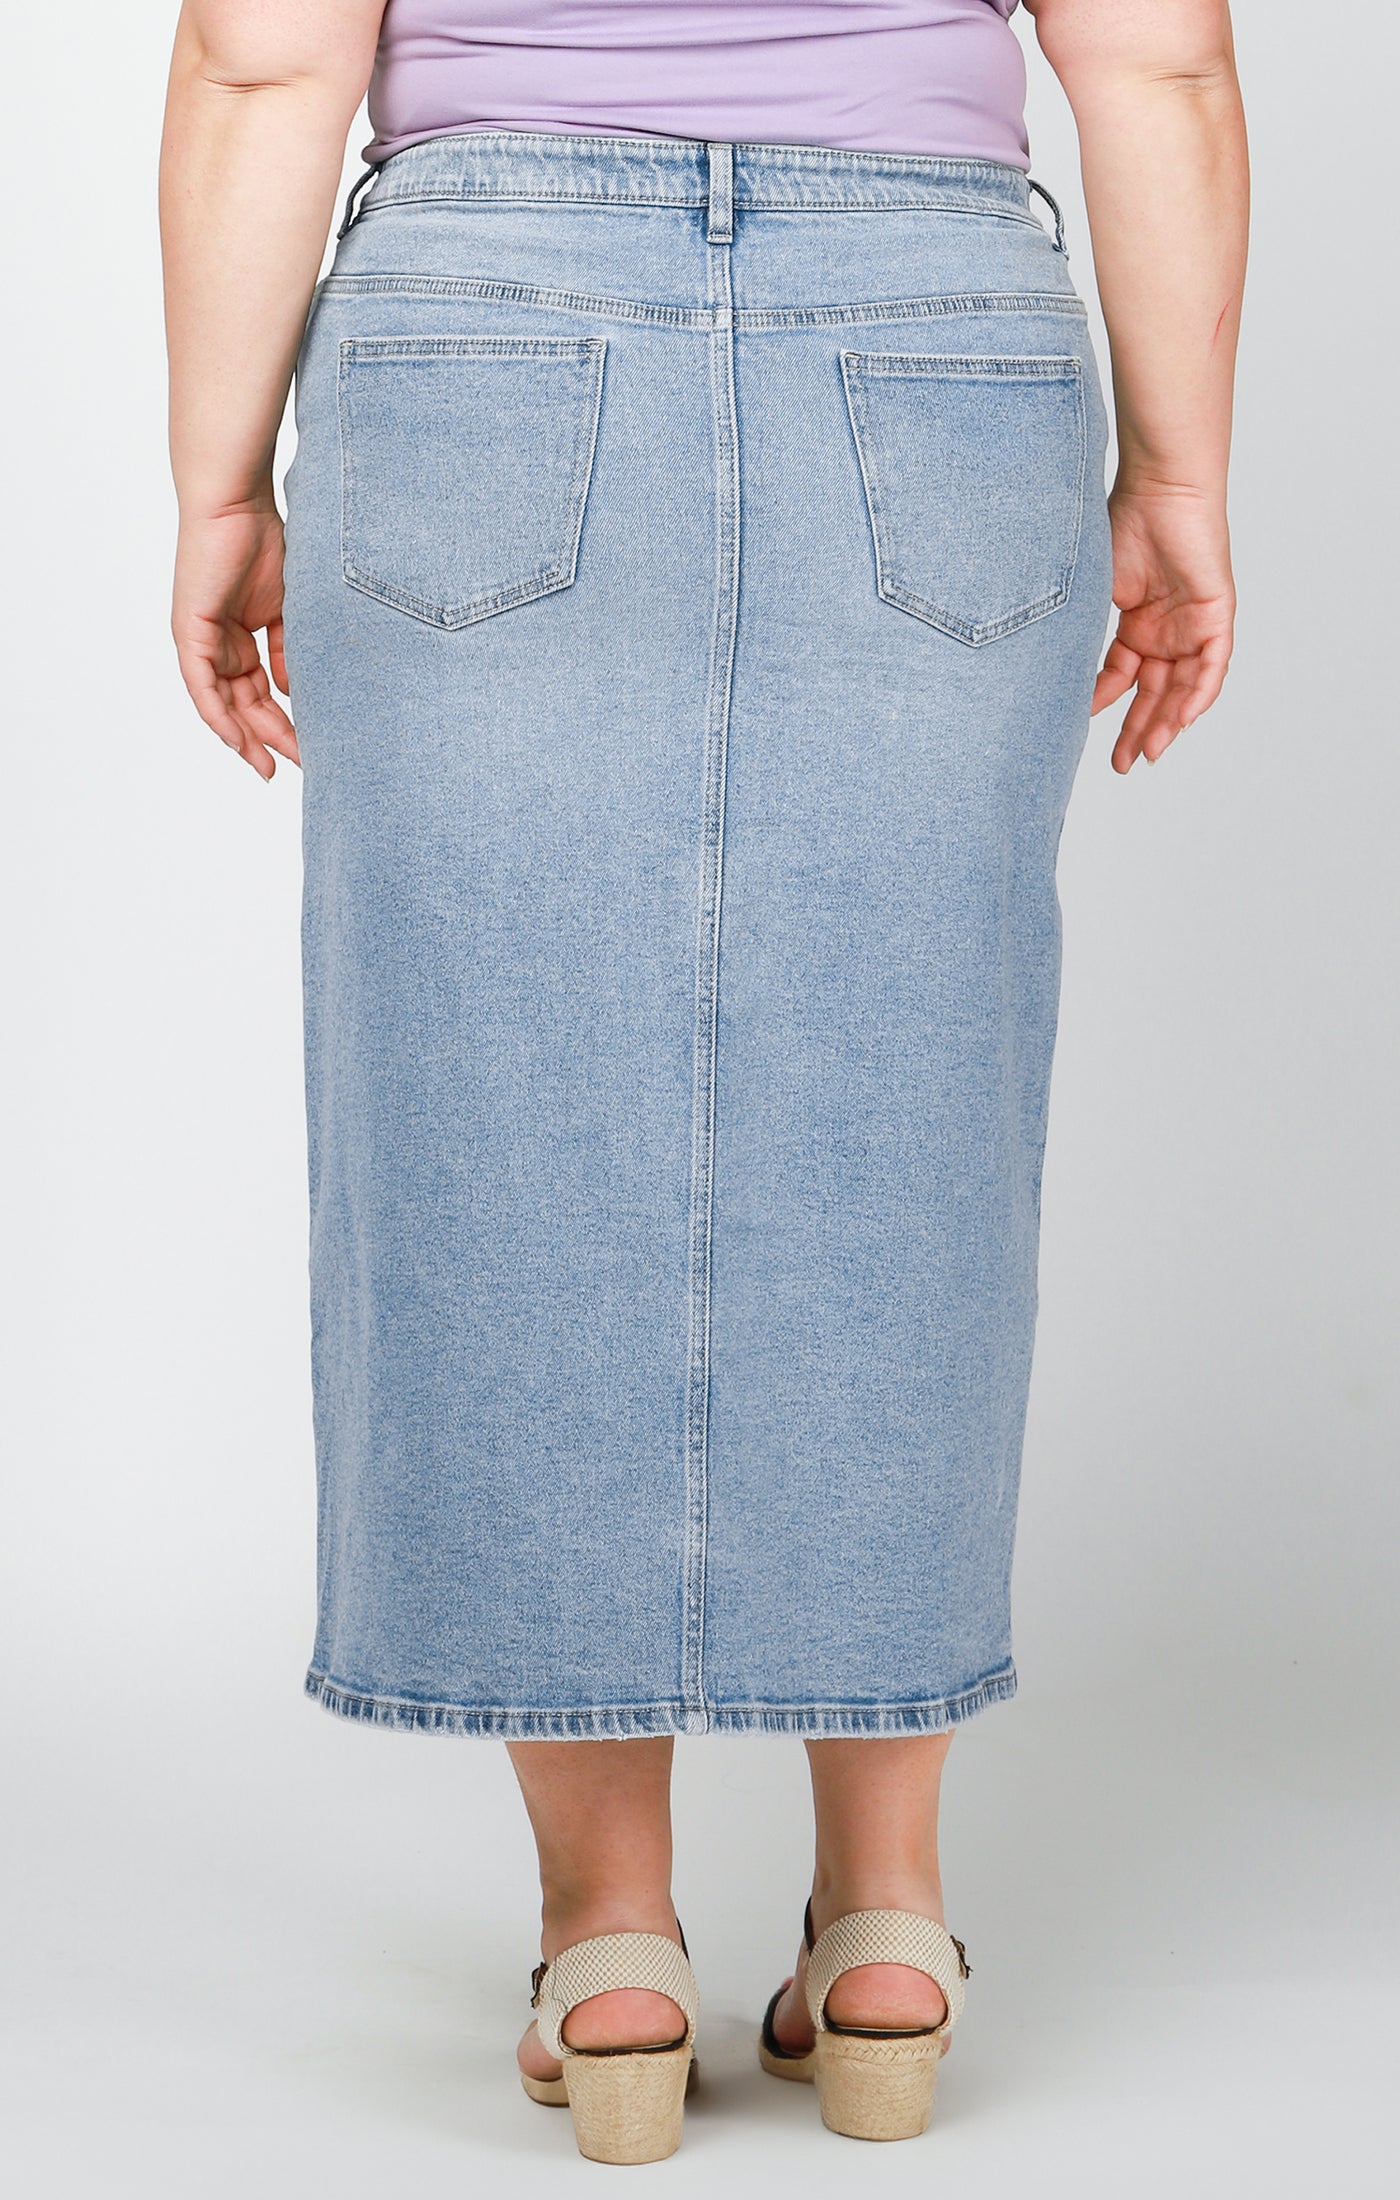 Denim Skirt Plus - Out of the Blue